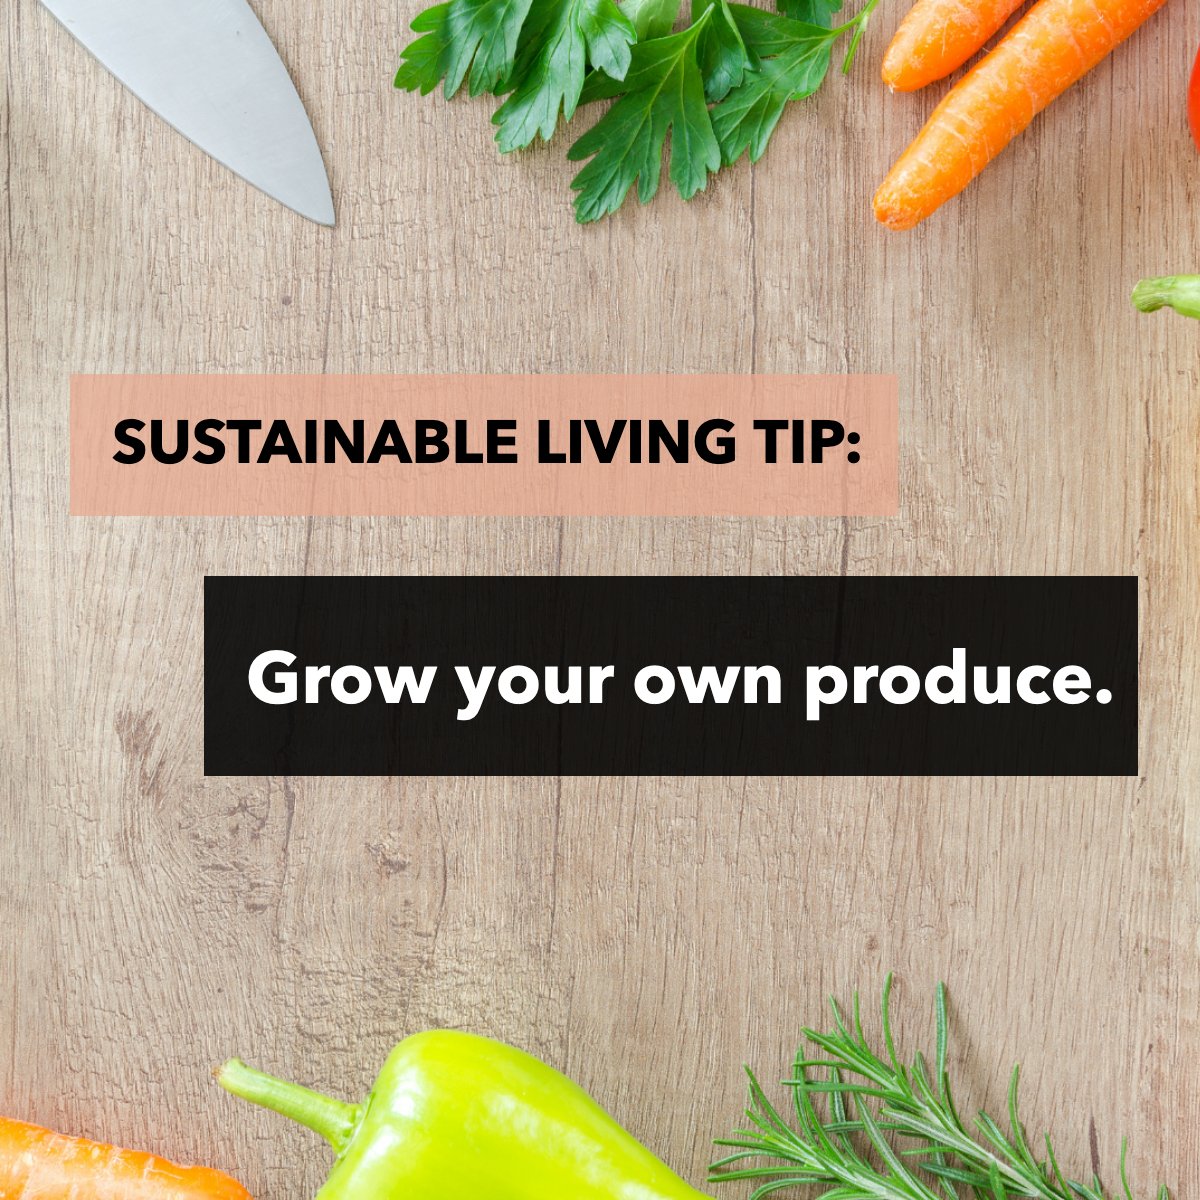 Do you cultivate some of your vegetables or food 🍅?  This is not only healthier but extremely sustainable! 

#sustainablelifestyle #sustainable #sustainablity #sustainablefood 
 #investors #sellers #buyers #florida #orlando #orlandoflorida #floridadayatirim